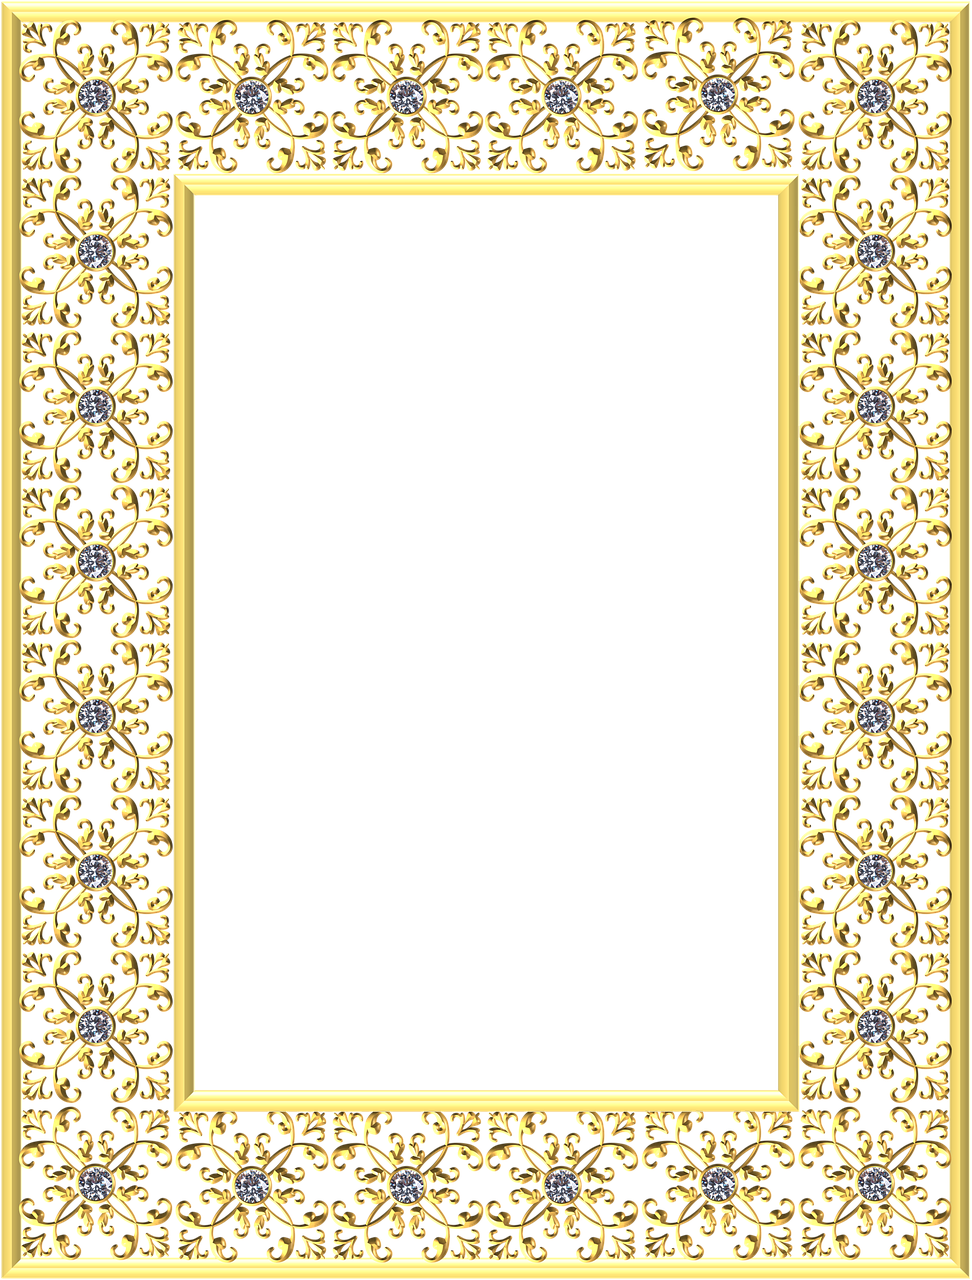 A Gold And Black Picture Frame